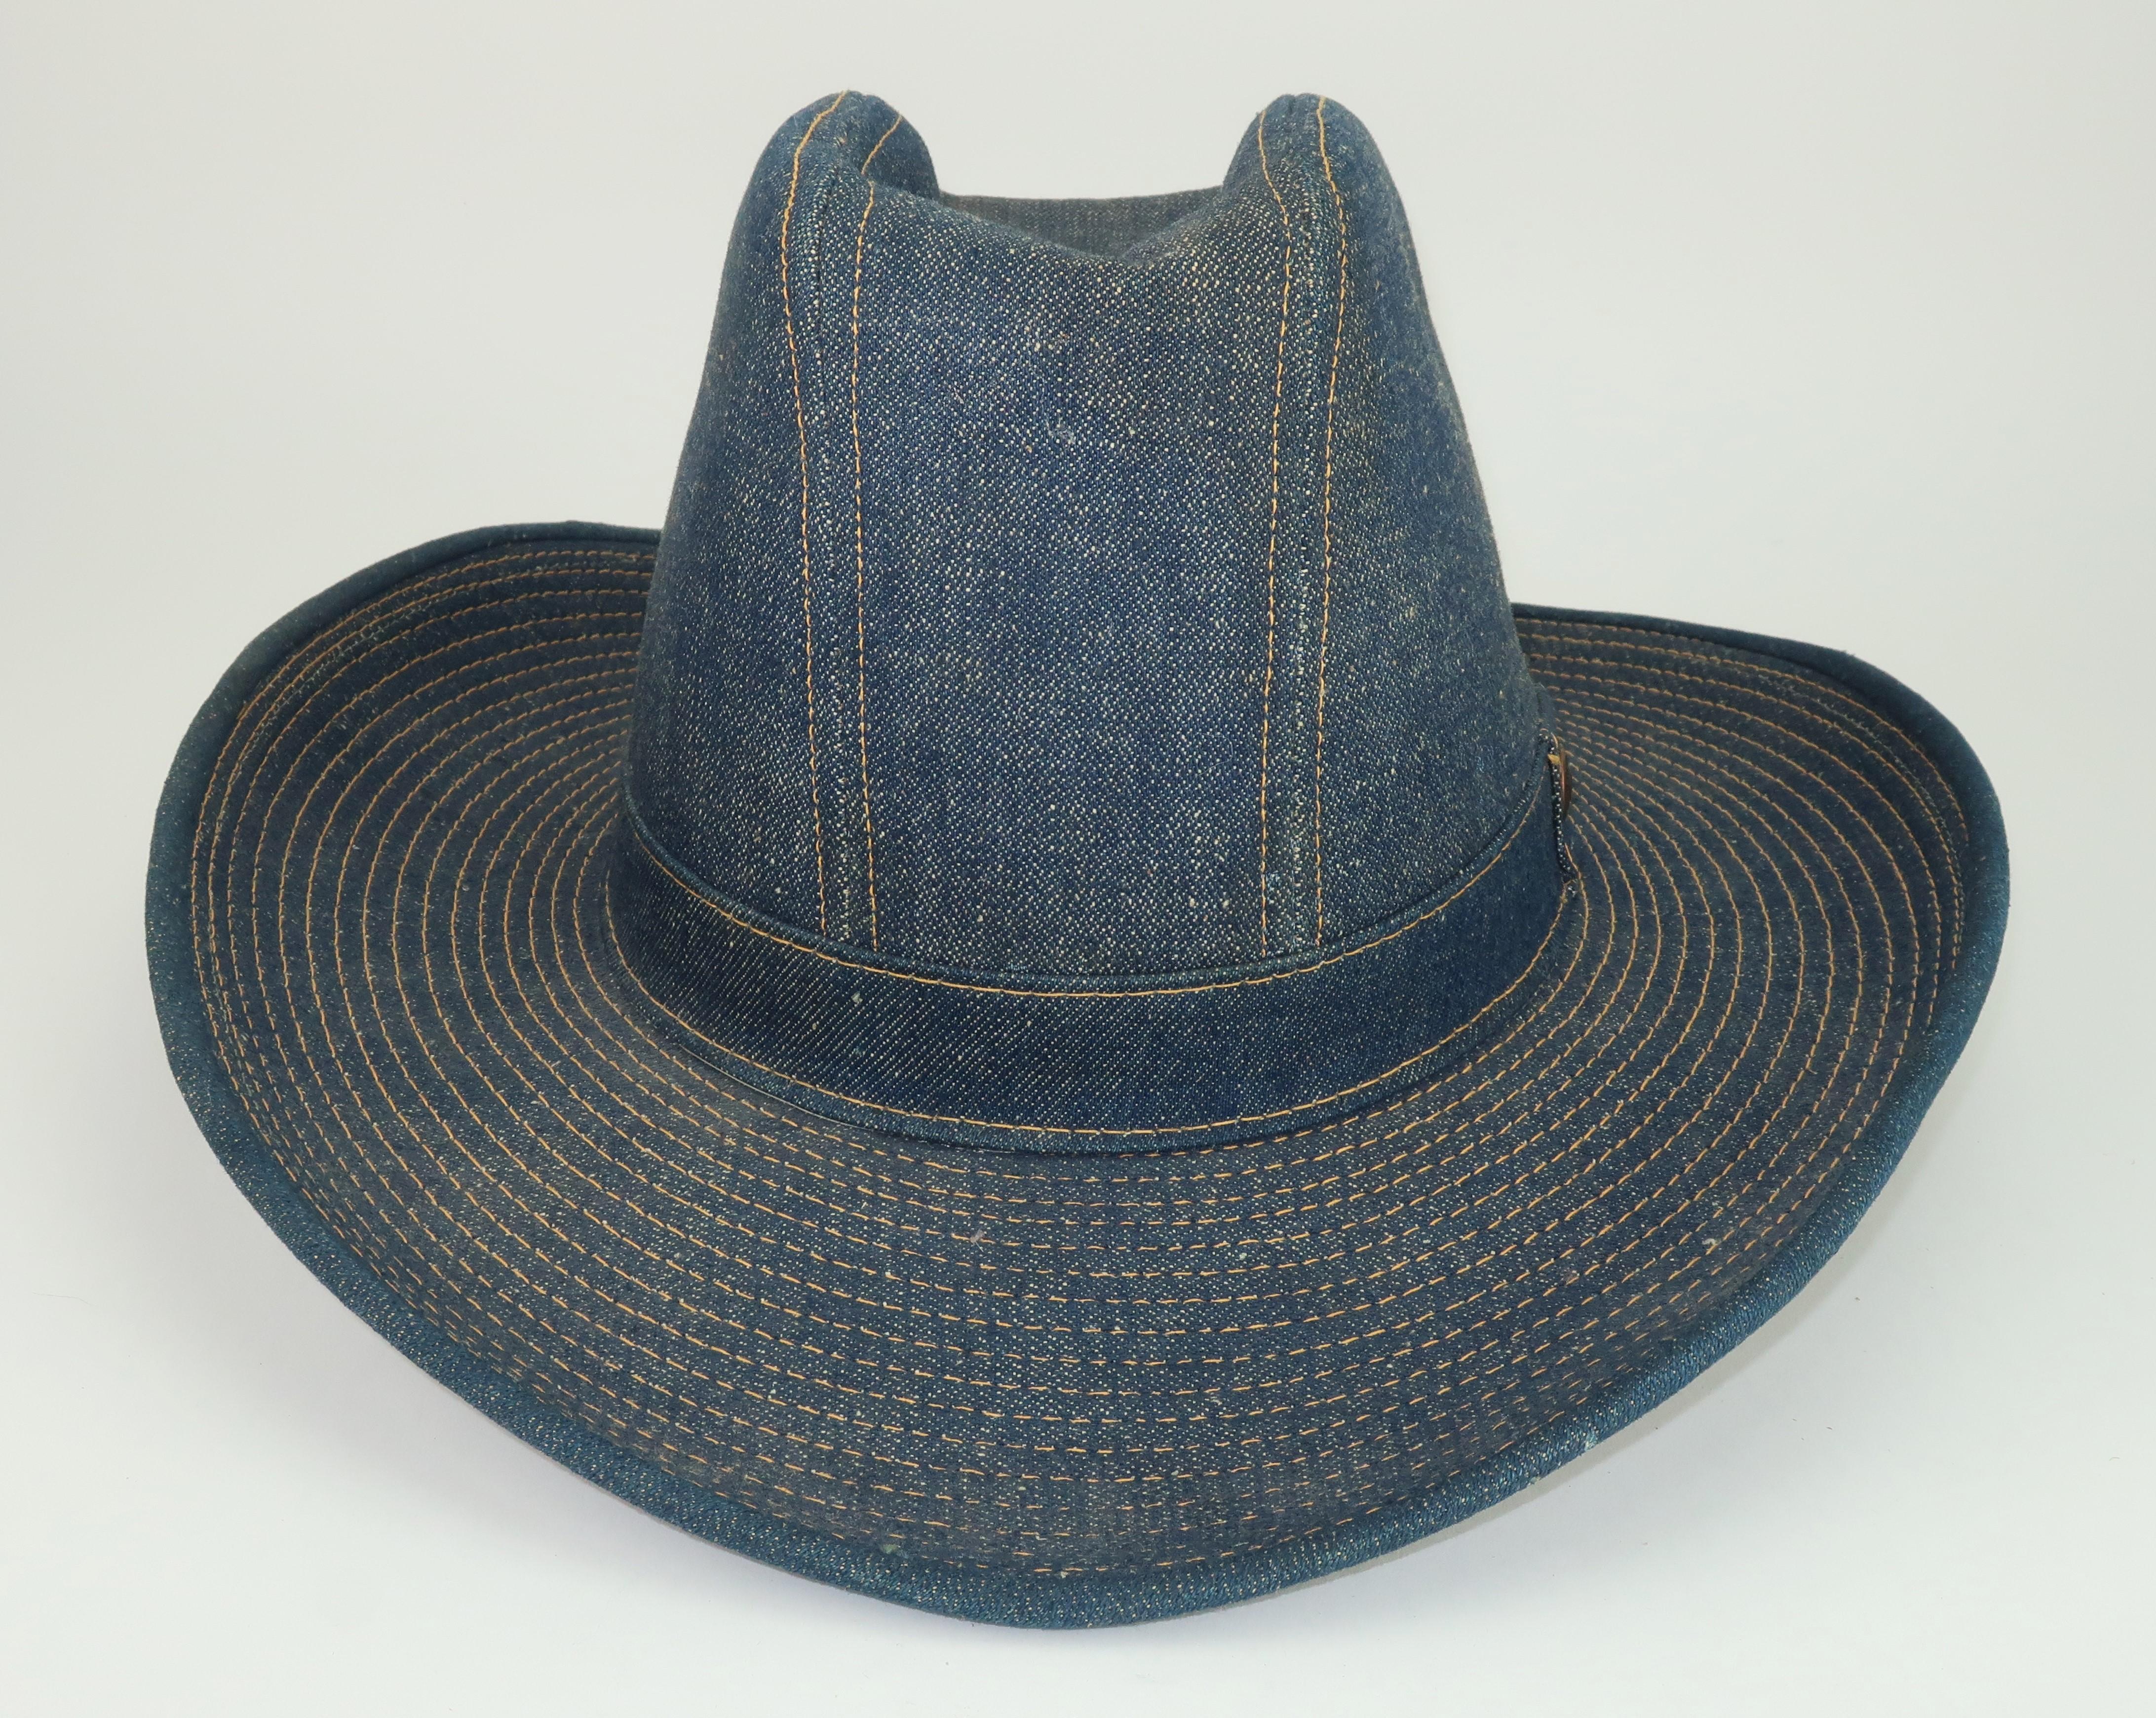 Late 20th Century Levi Strauss denim cowboy hat with iconic contrast stitching and a Levi's rivet at the band.  The hat has an old school hard body with satin lining and the Levi's gold foil label to the interior.  All the details of the Americana